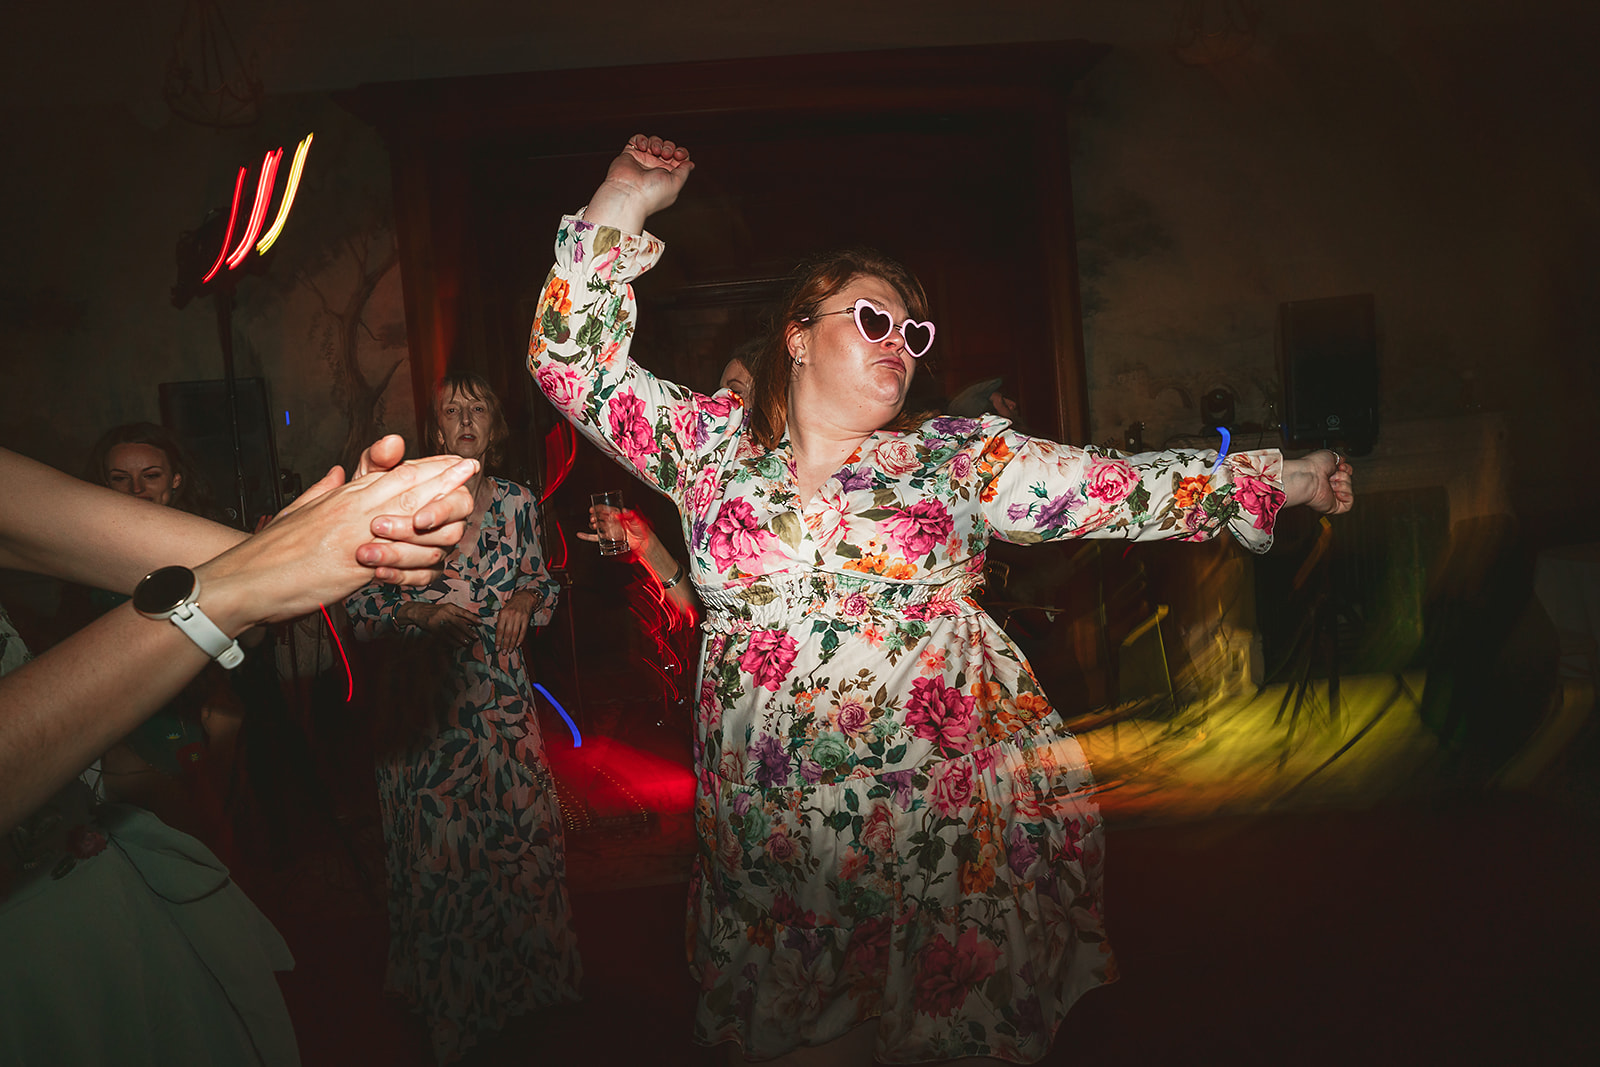 A woman in a floral dress dancing at a Clevedon Hall party.